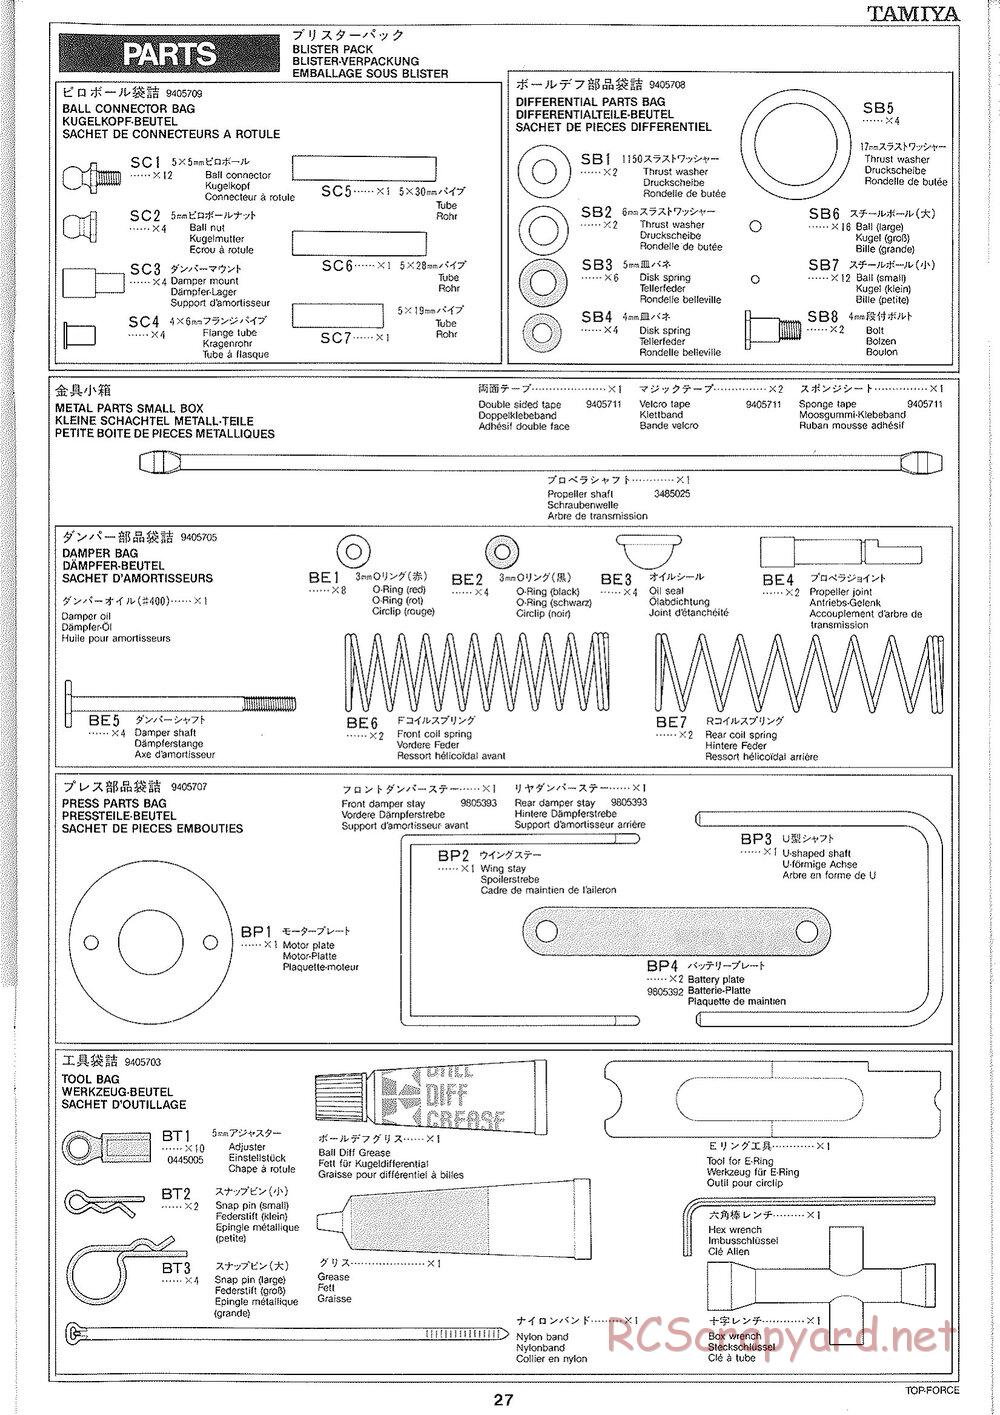 Tamiya - Top Force 2005 - DF-01 Chassis - Manual - Page 27